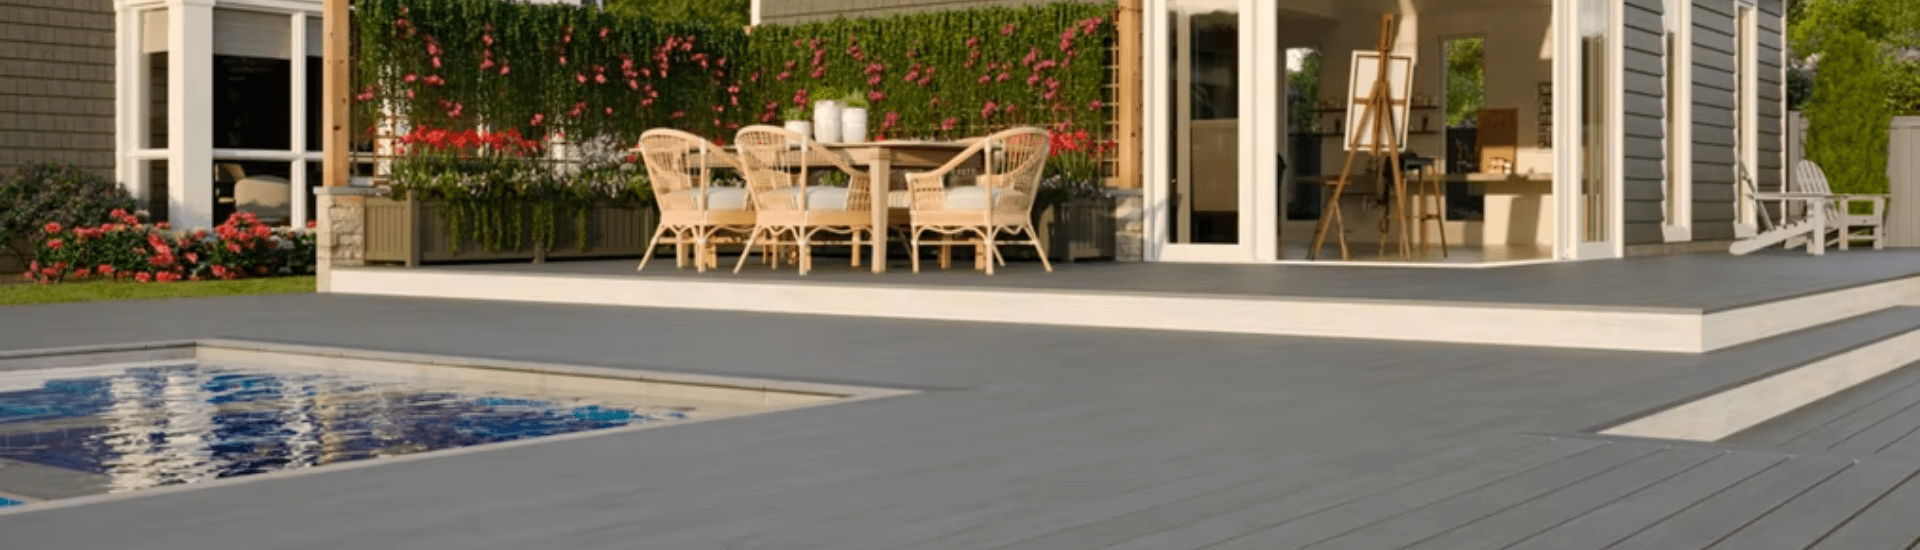 CCOMPARING TREX DECKING AND PRESSURE-TREATED WOOD_ MAKING THE RIGHT CHOICE FOR YOUR DECK